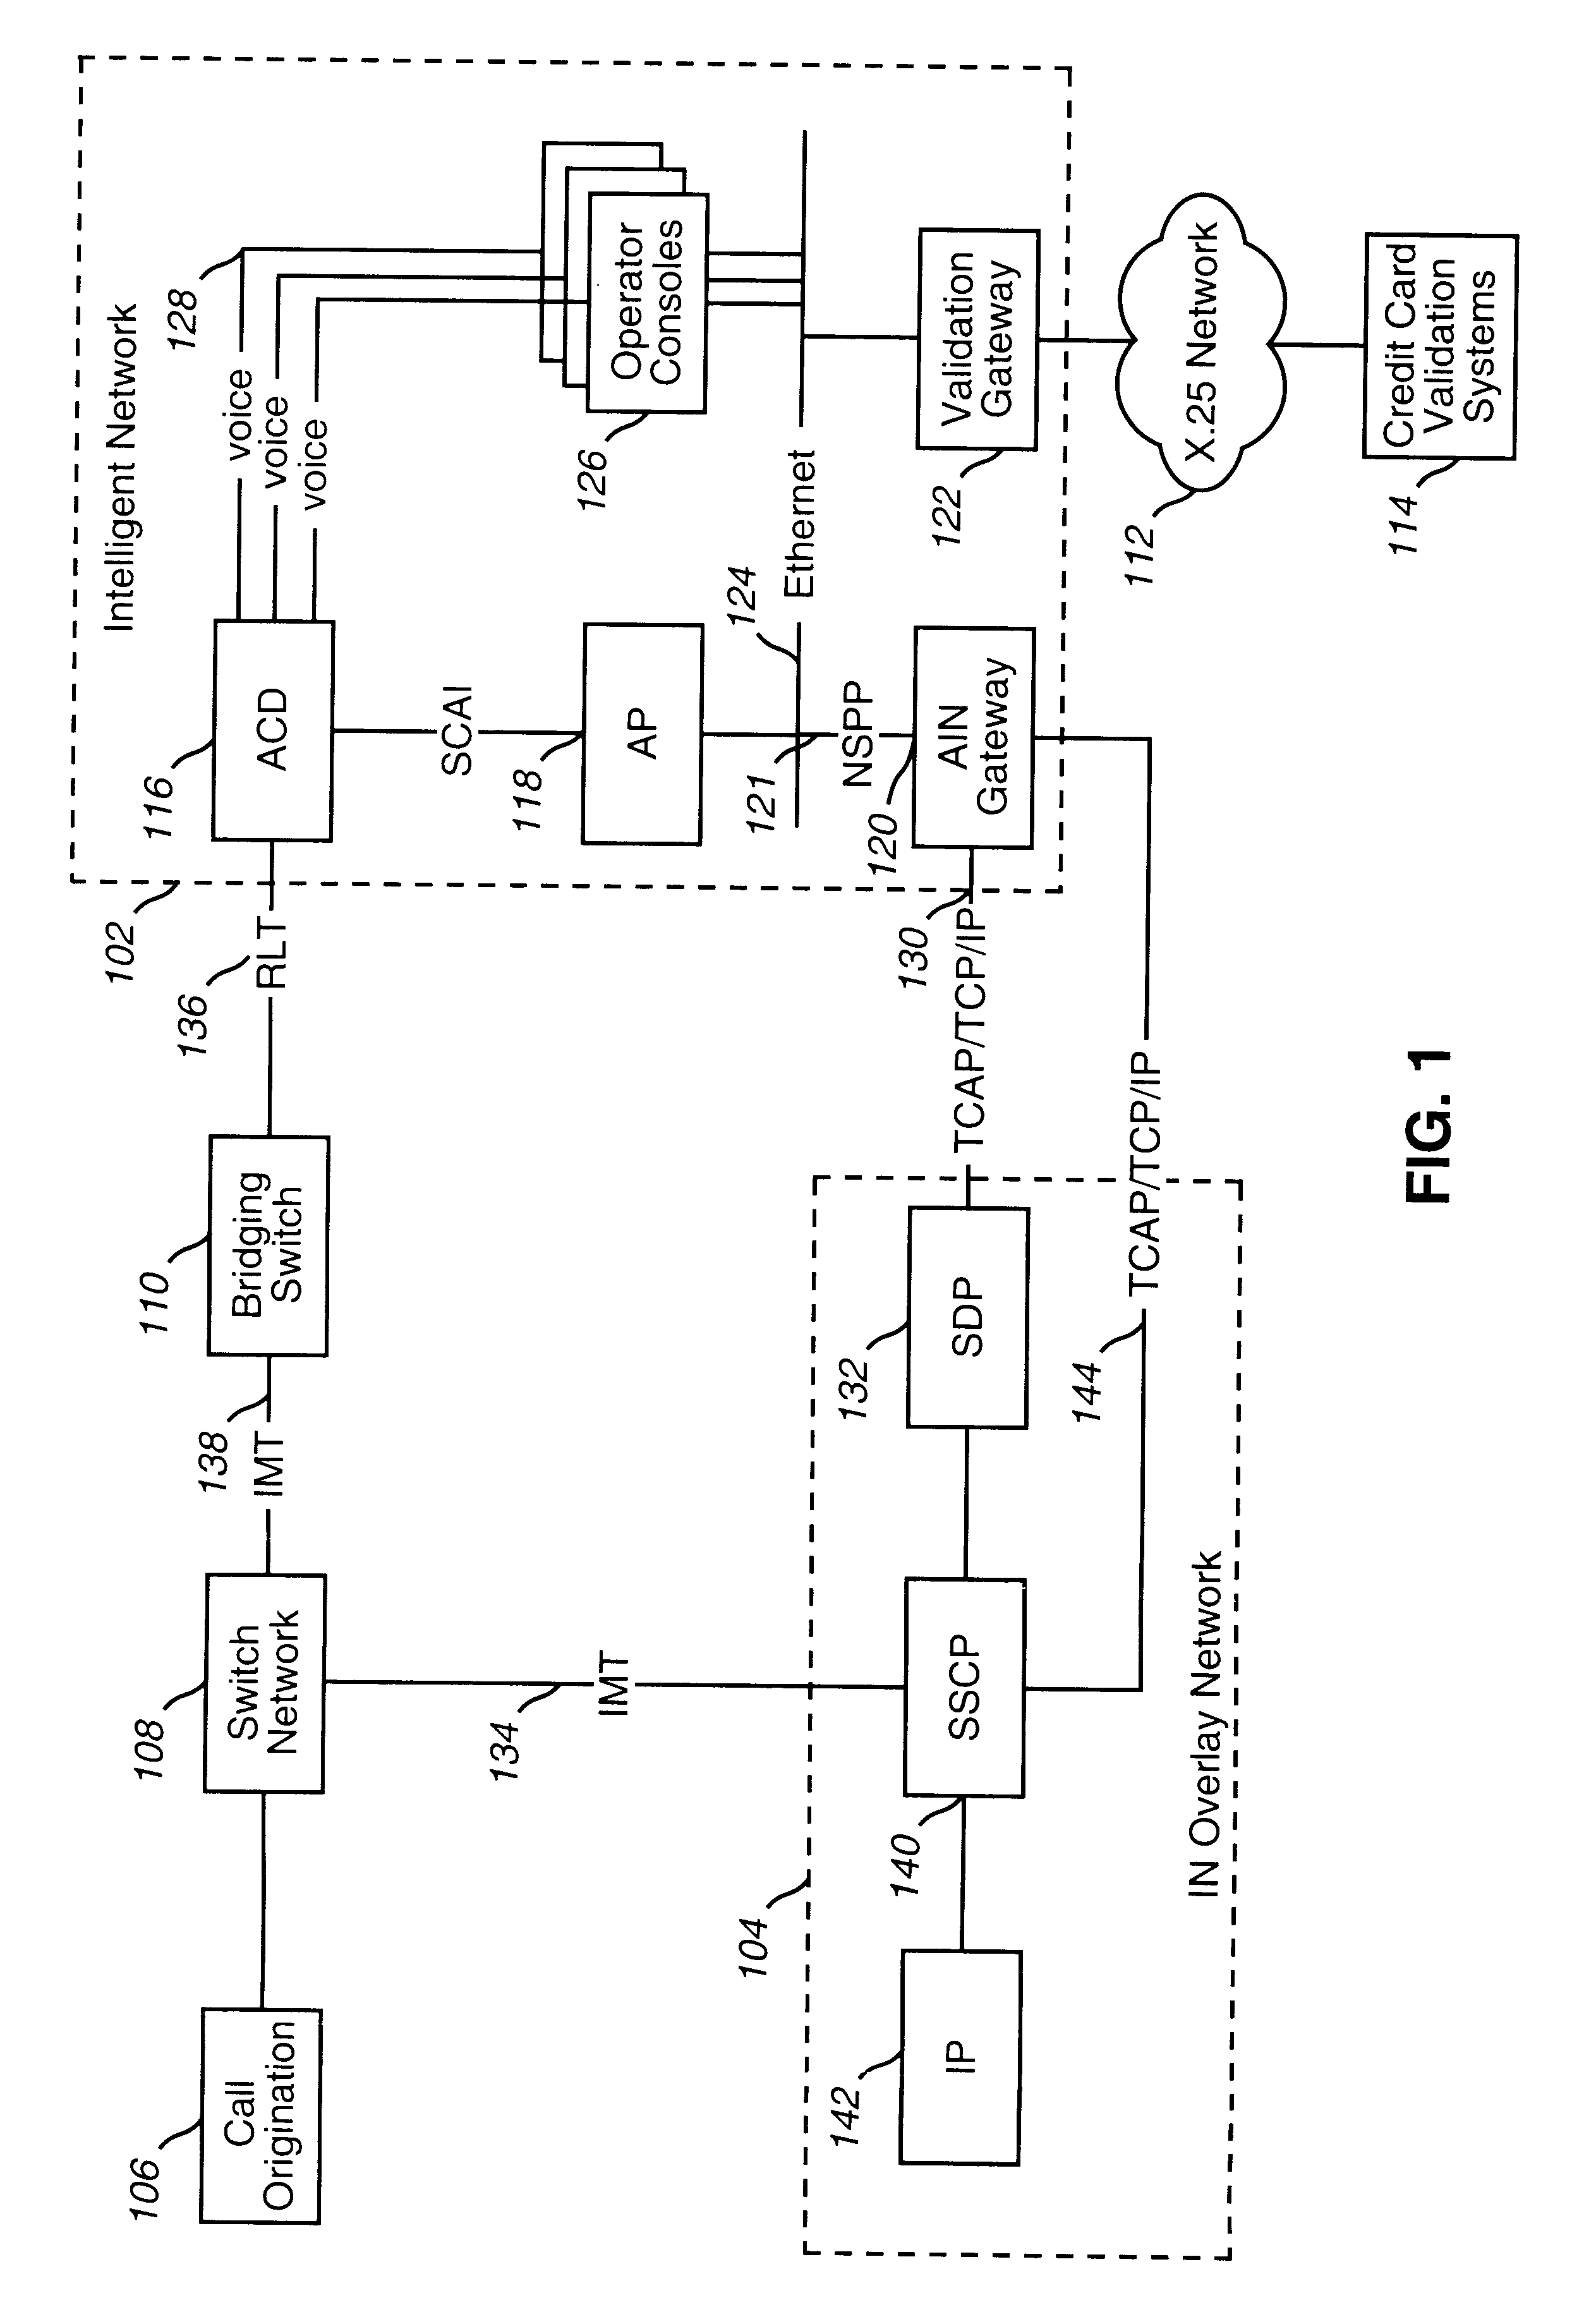 System and method for providing operator and customer services